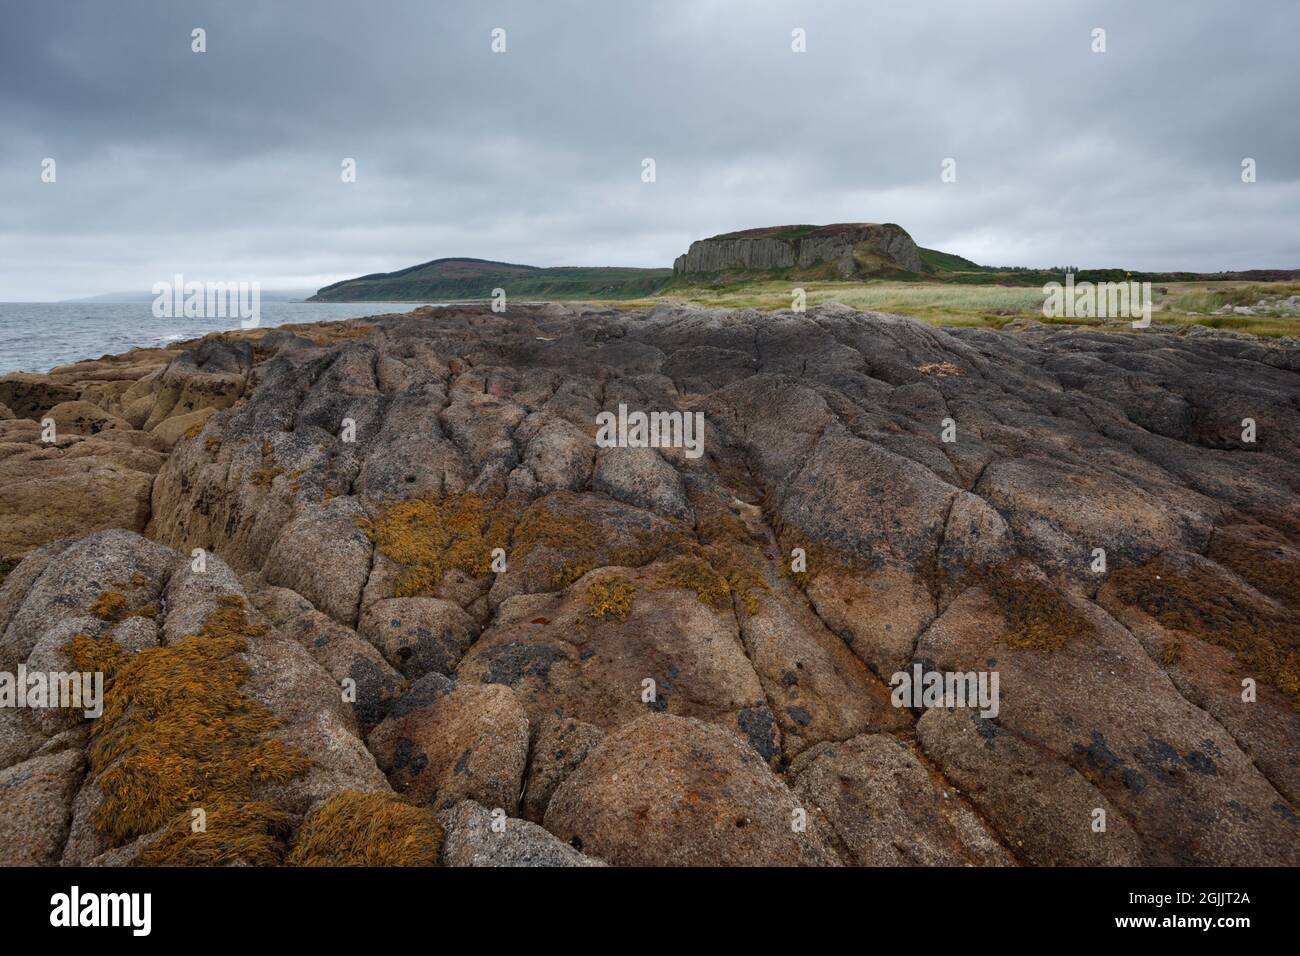 Drumadoon Point. Isle of Arran. Scotland, UK. Volcanic (igneous) geology on the foreshore and in the distant sills. Stock Photo